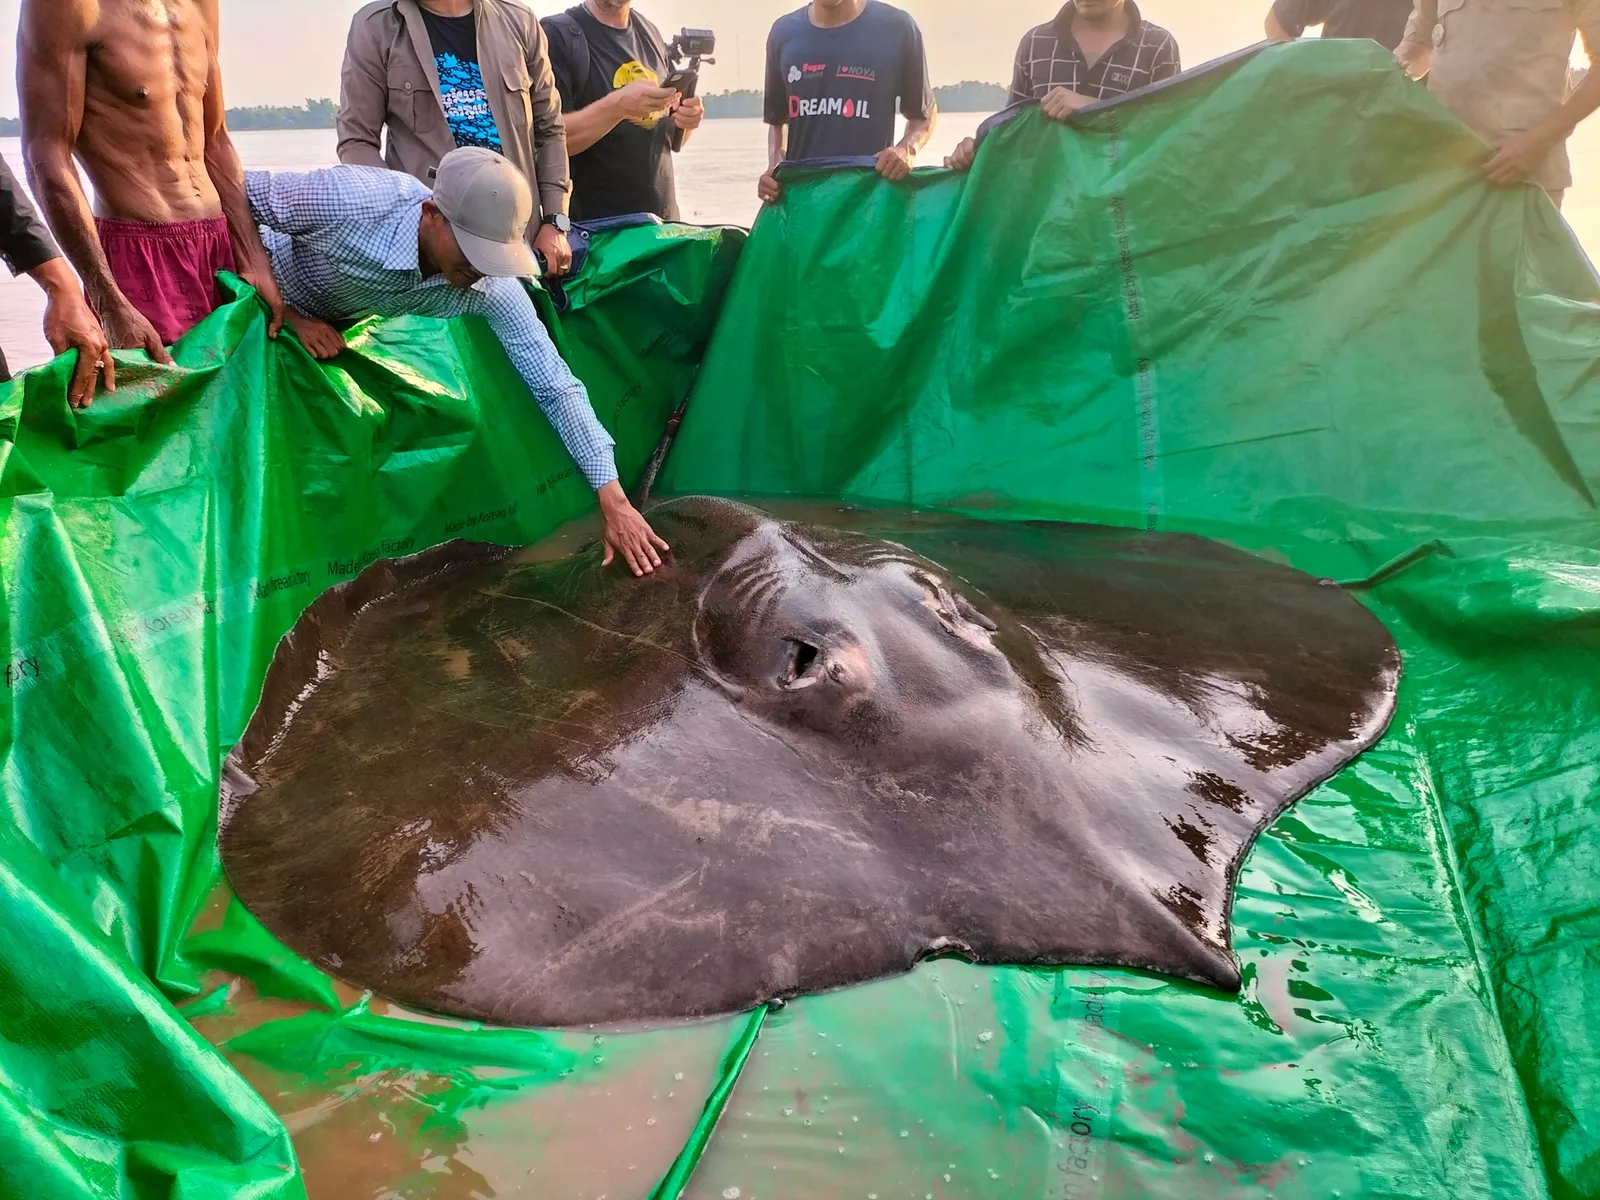 Stingray Found in Cambodia Sets Record for World's Largest Freshwater Fish  | Smart News| Smithsonian Magazine